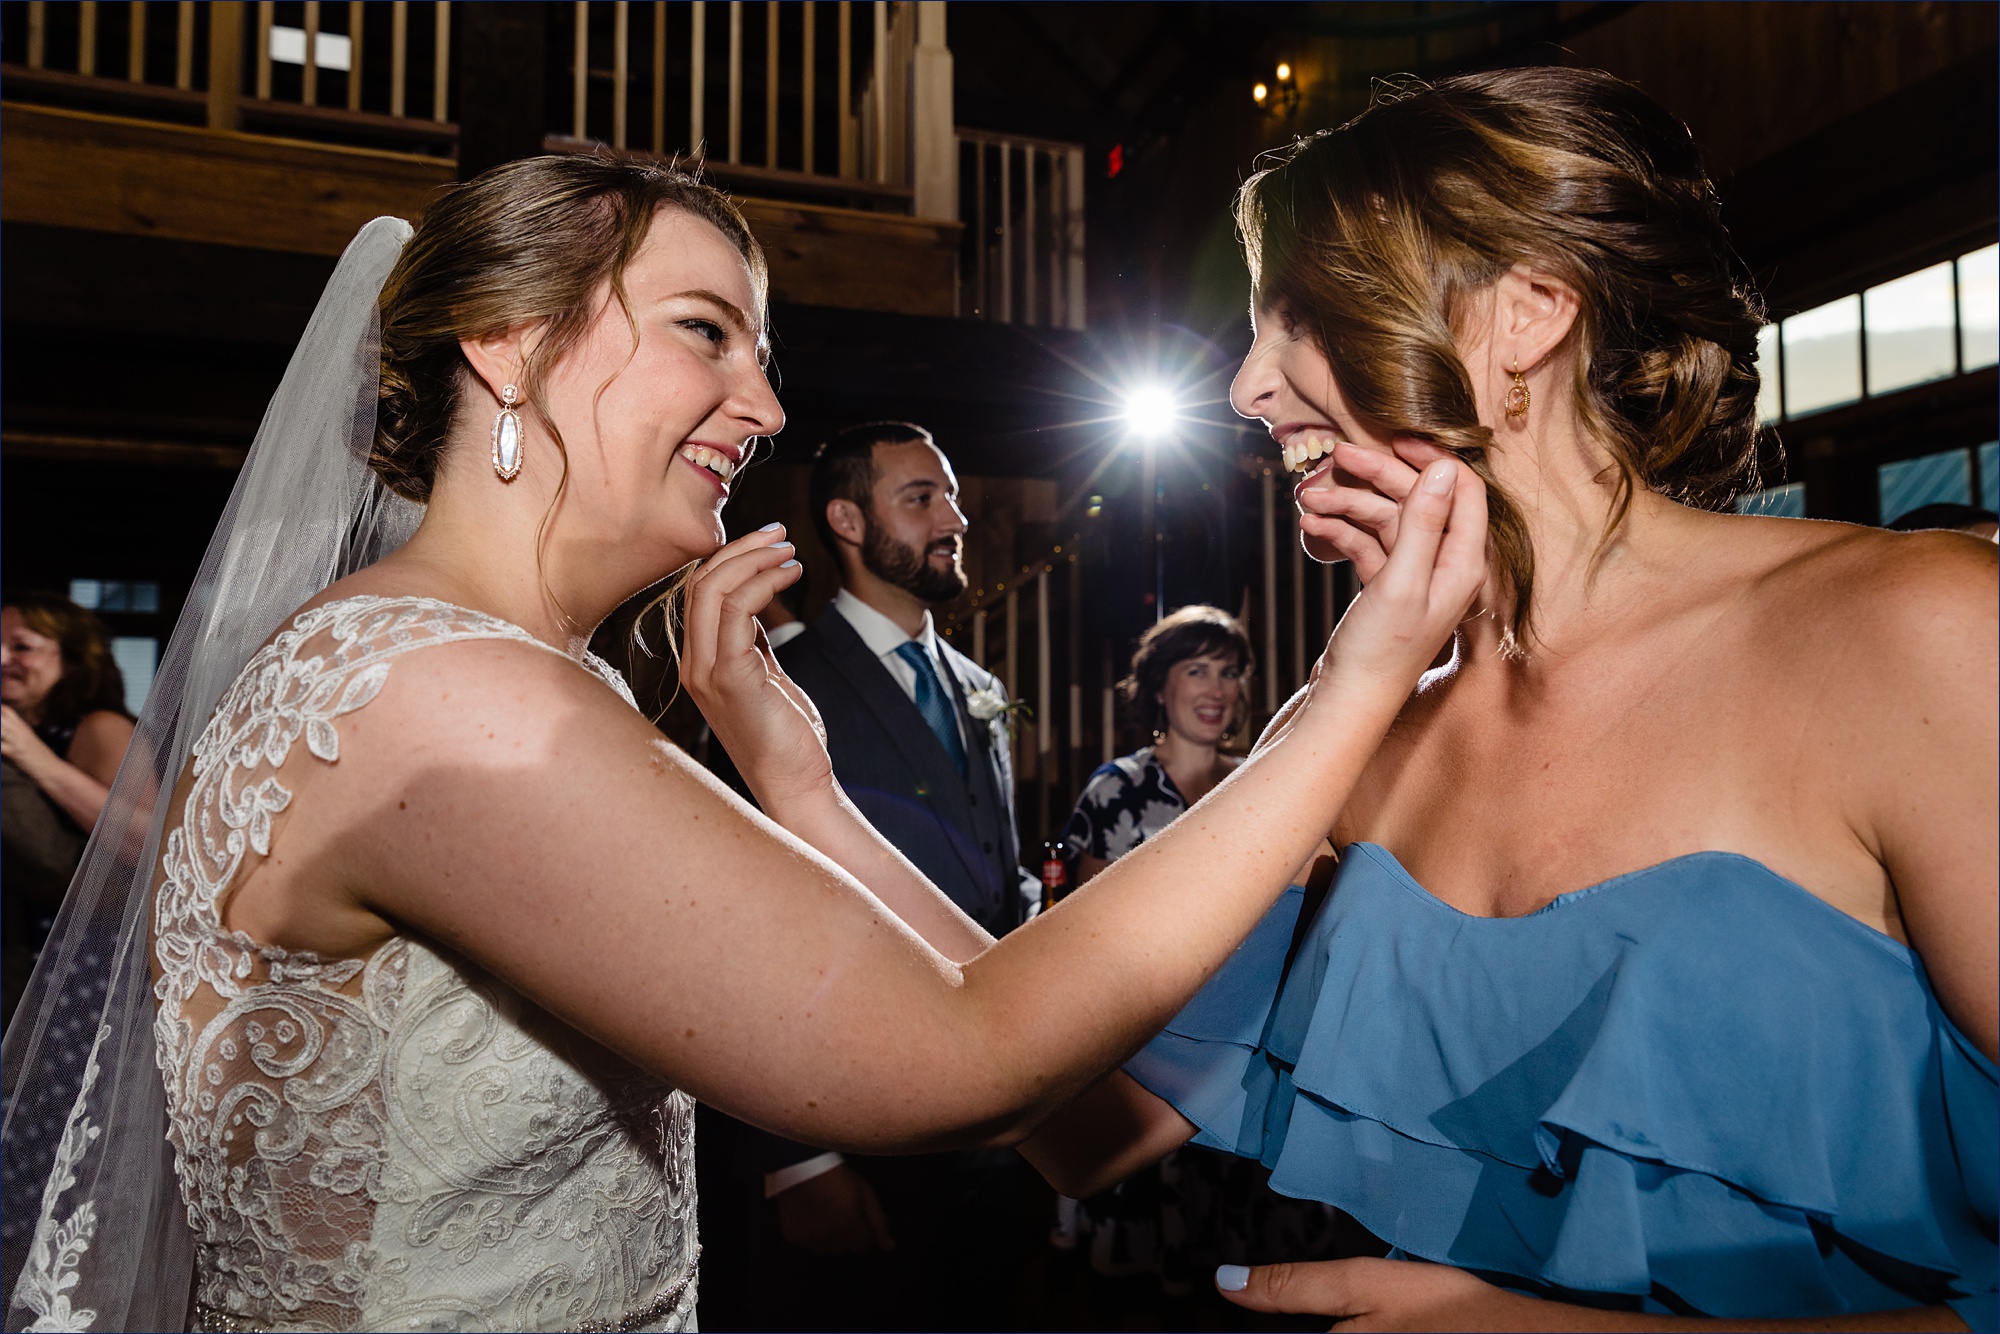 The bride shares a moment with her bridesmaid at the barn at the Preserve at Chocorua wedding reception